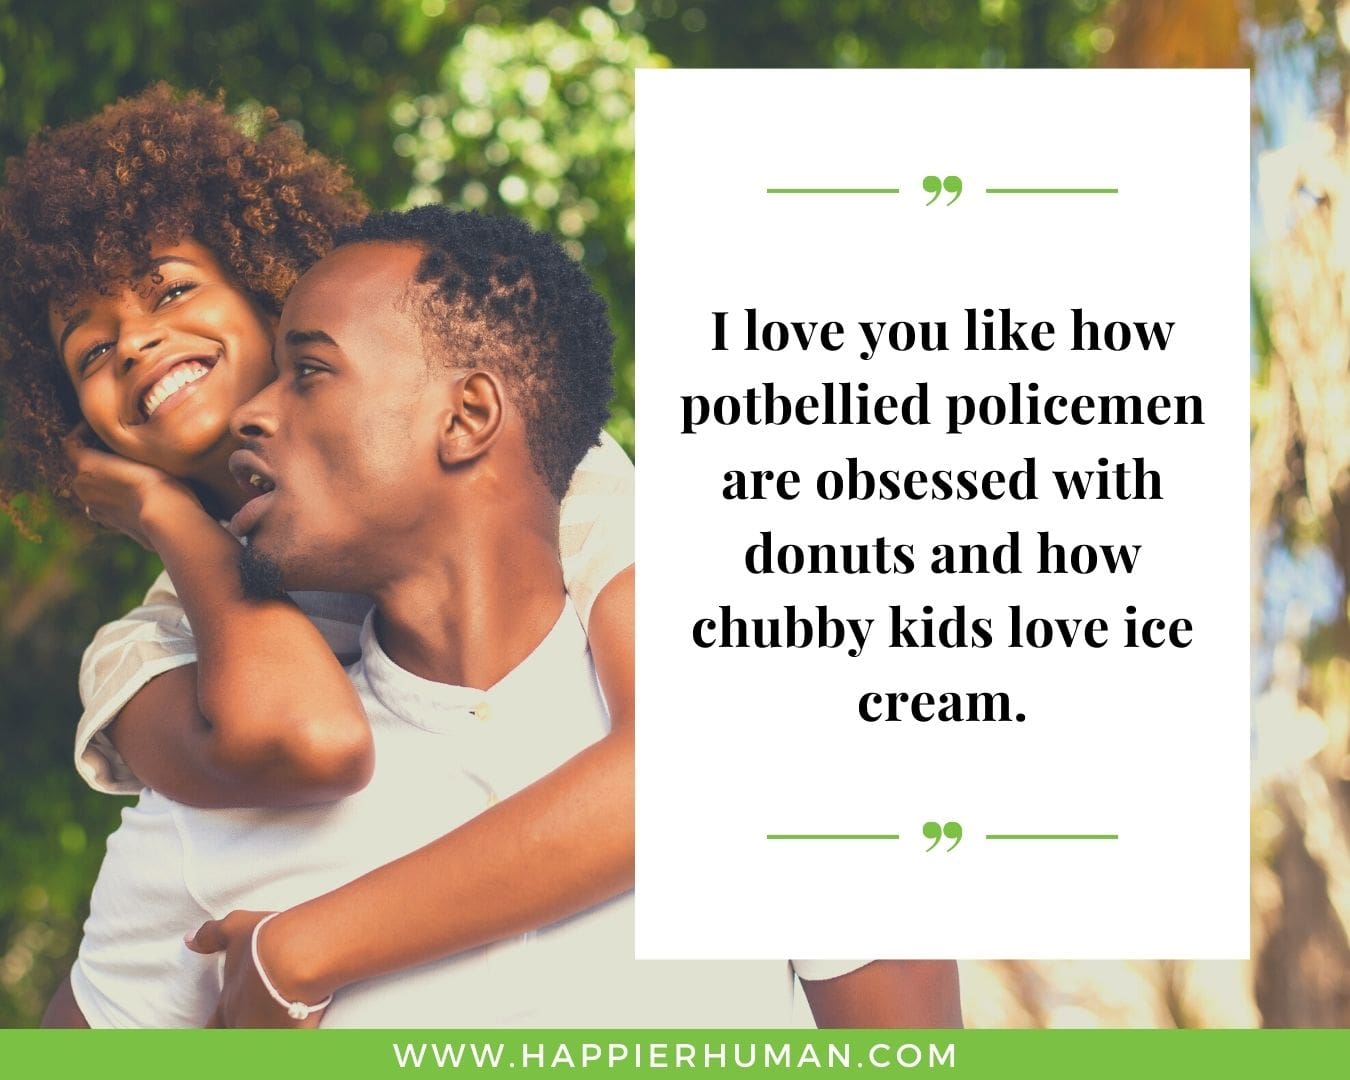 Funny Love Quotes for Her - “I love you like how potbellied policemen are obsessed with donuts and how chubby kids love ice cream.”